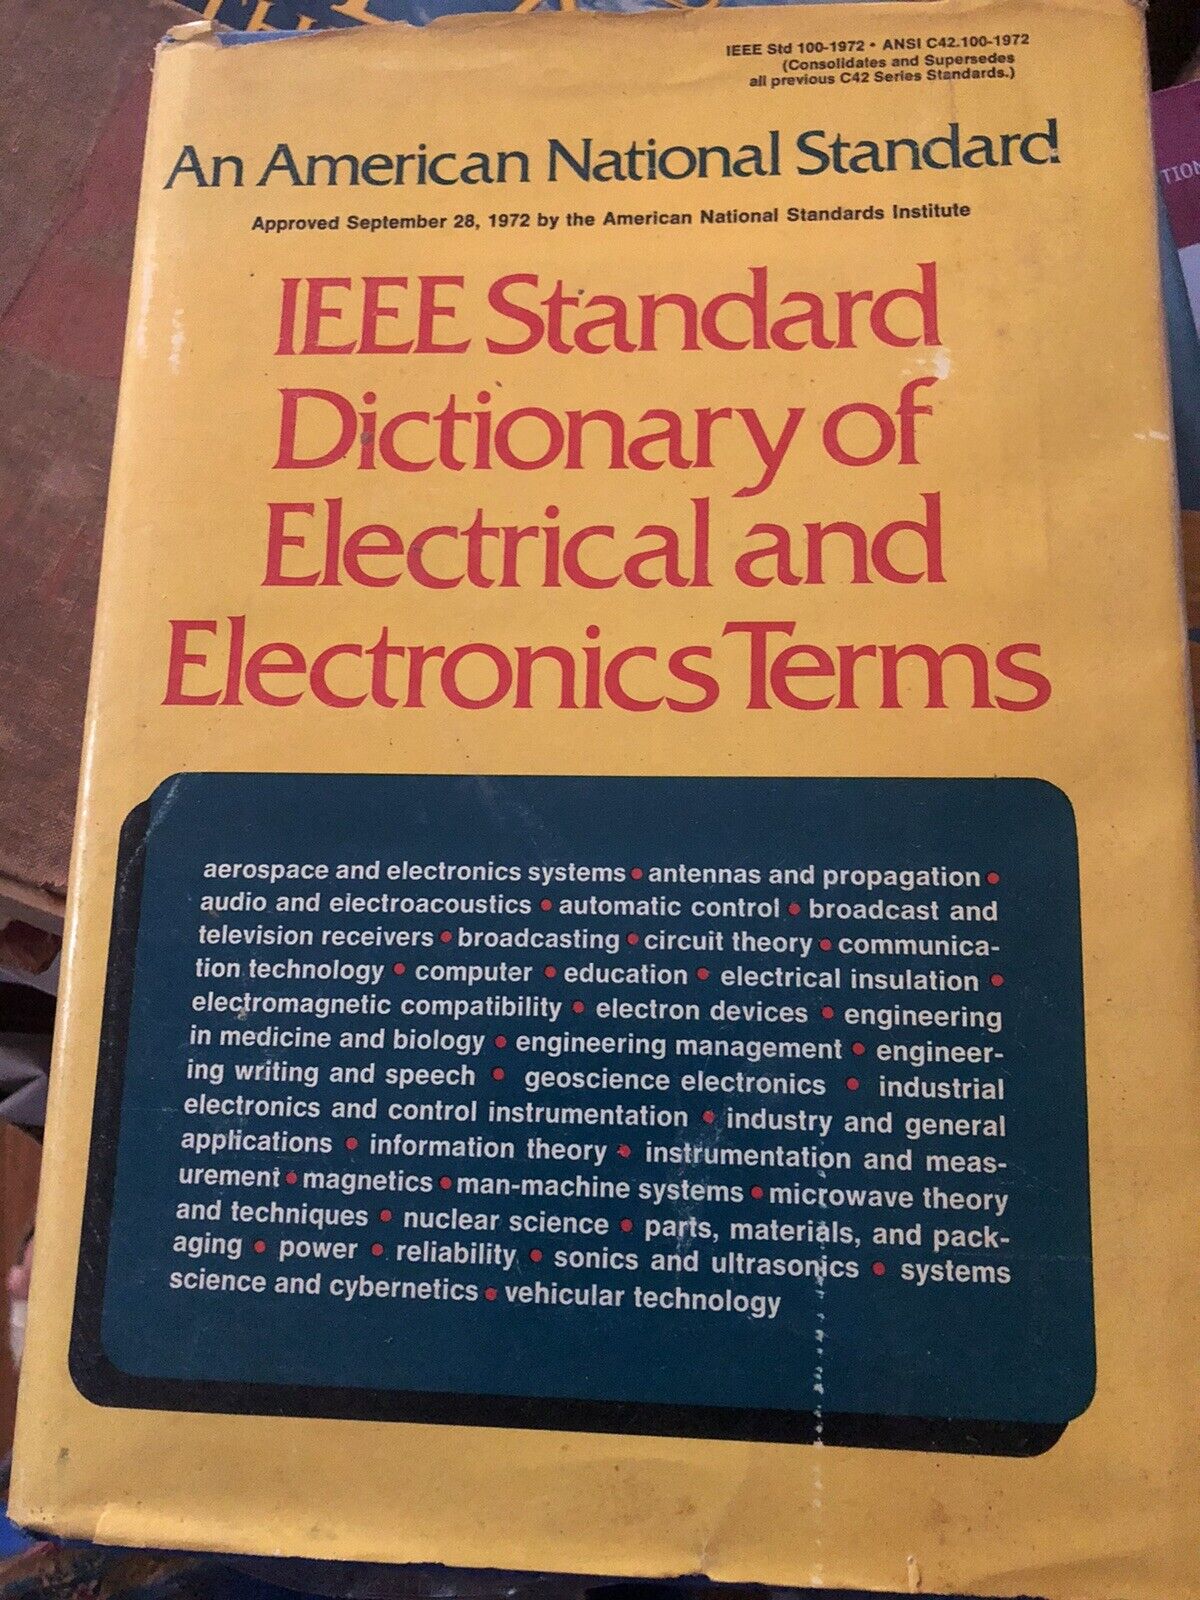 Horno Final imponer IEEE Standard Dictionary of Electrical and Electronics Terms | eBay